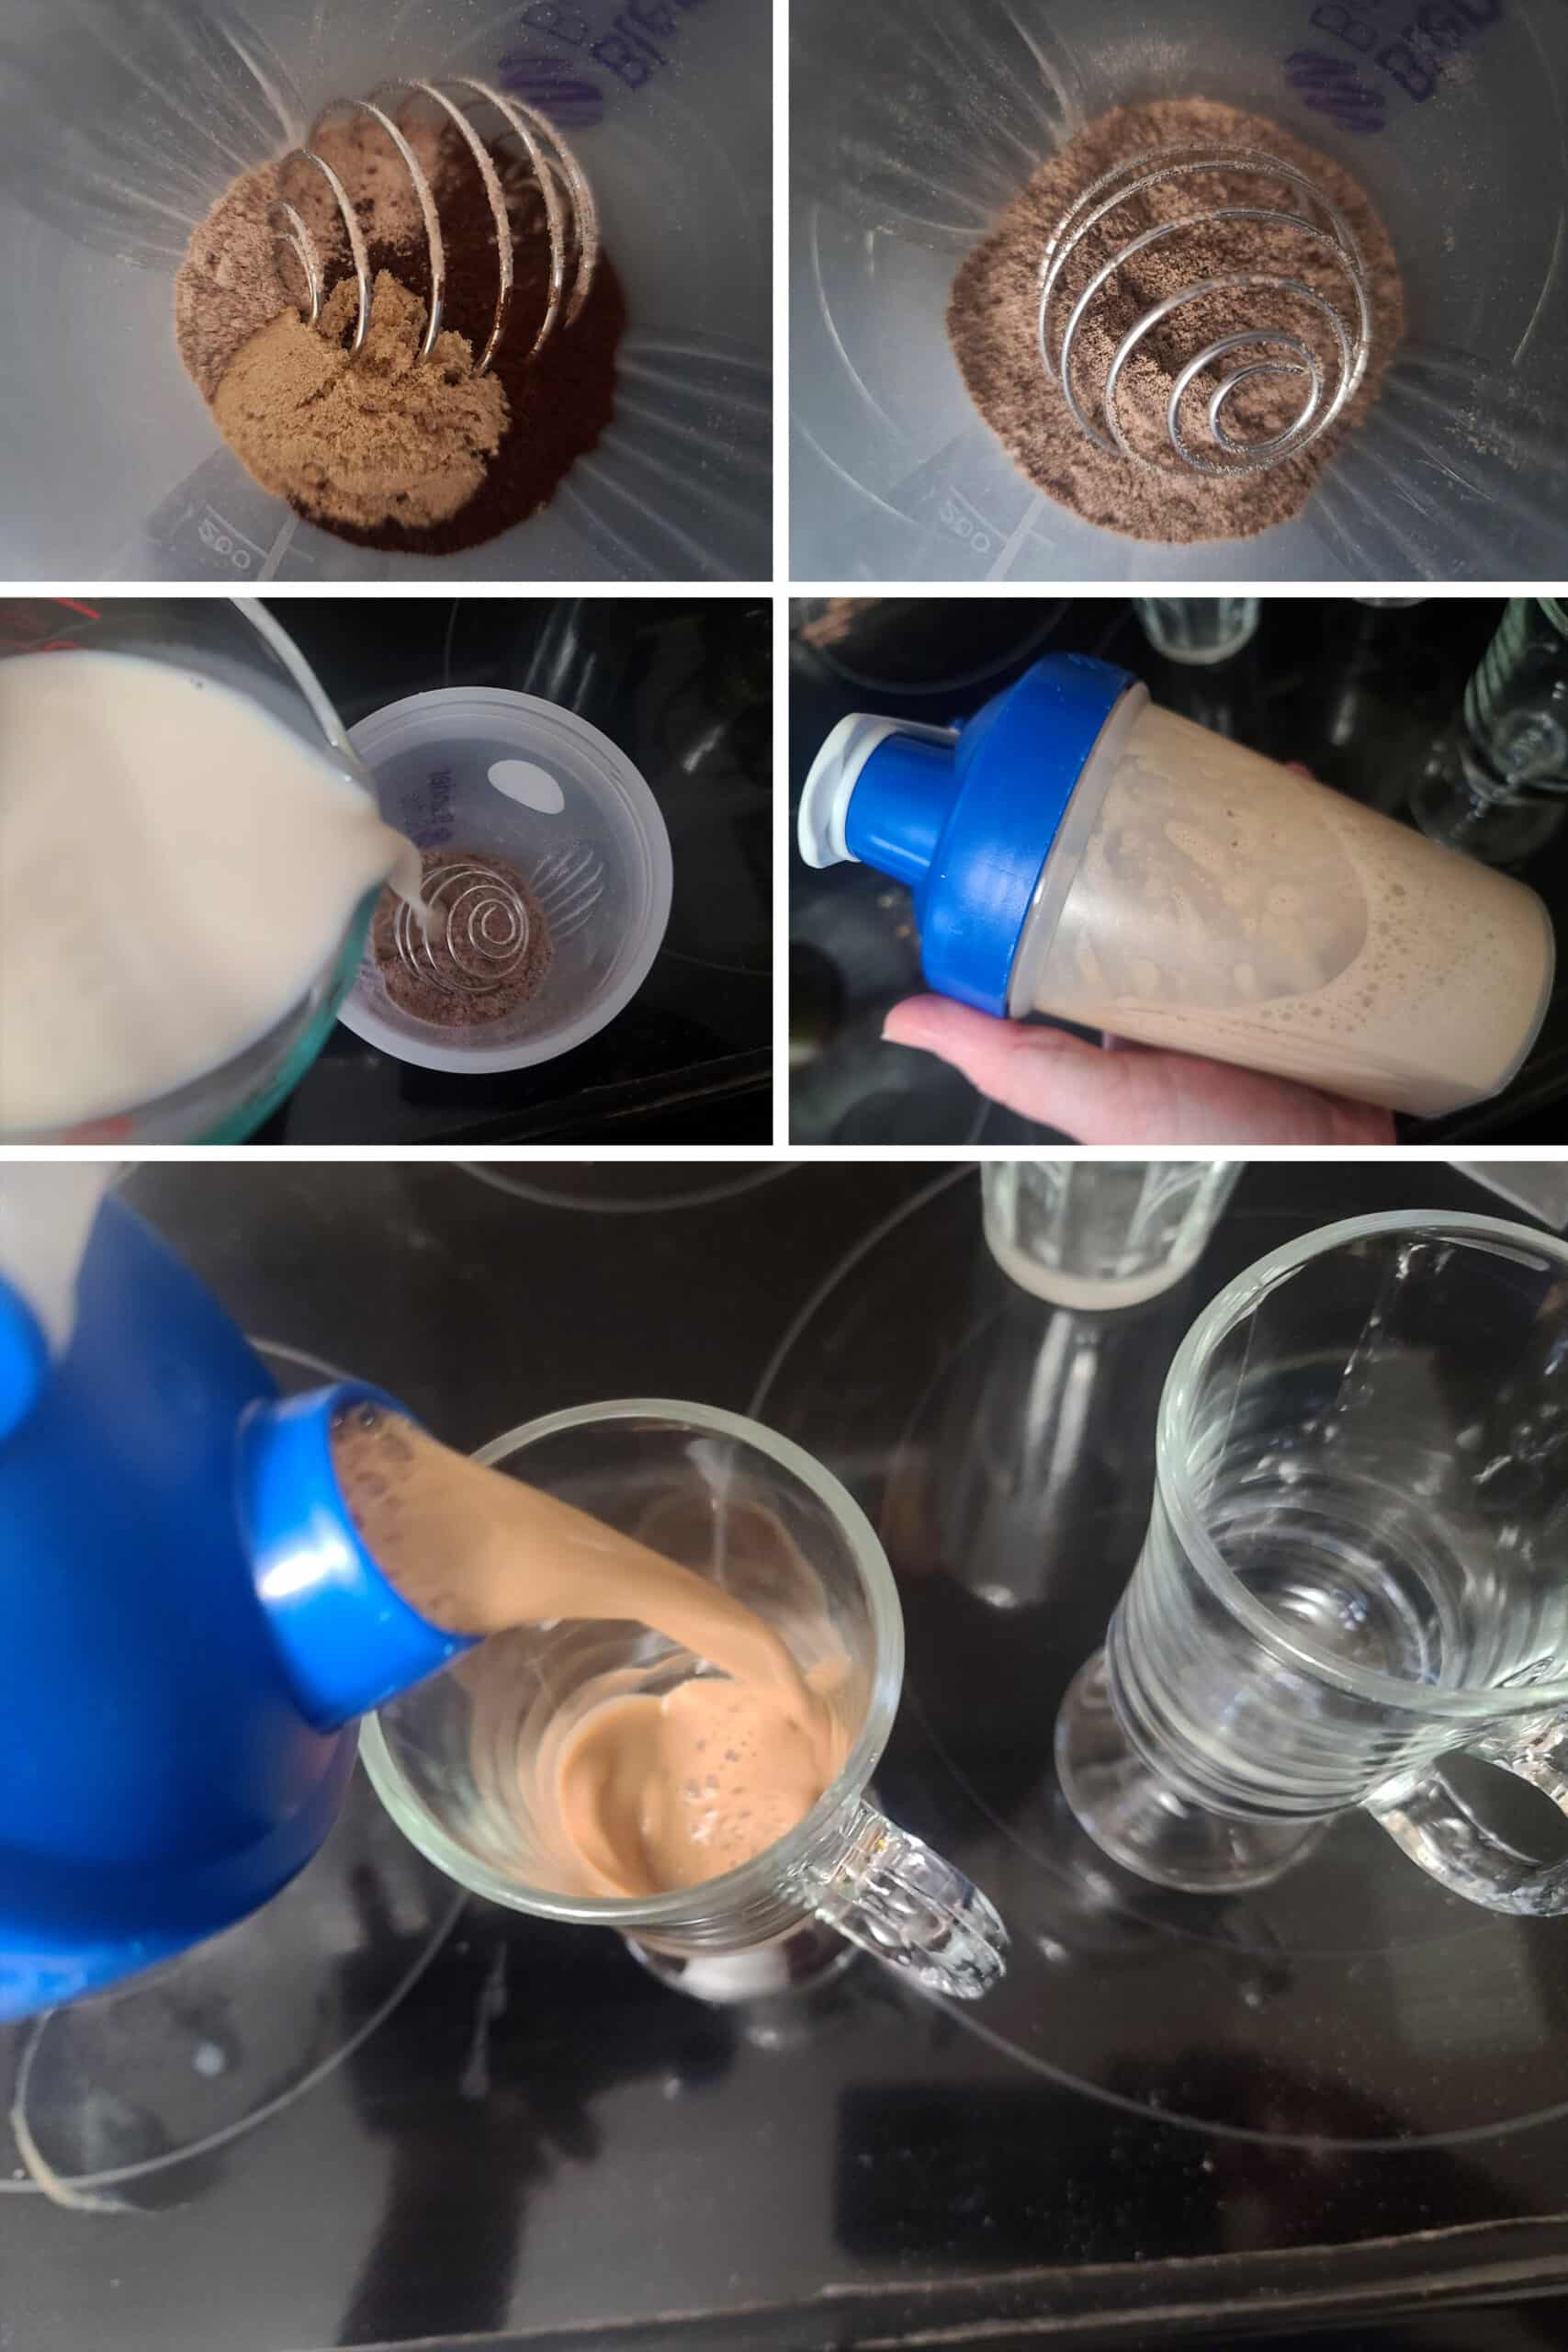 5 part image showing a protein mocha latte being mixed in a shaker and poured into a glass mug.